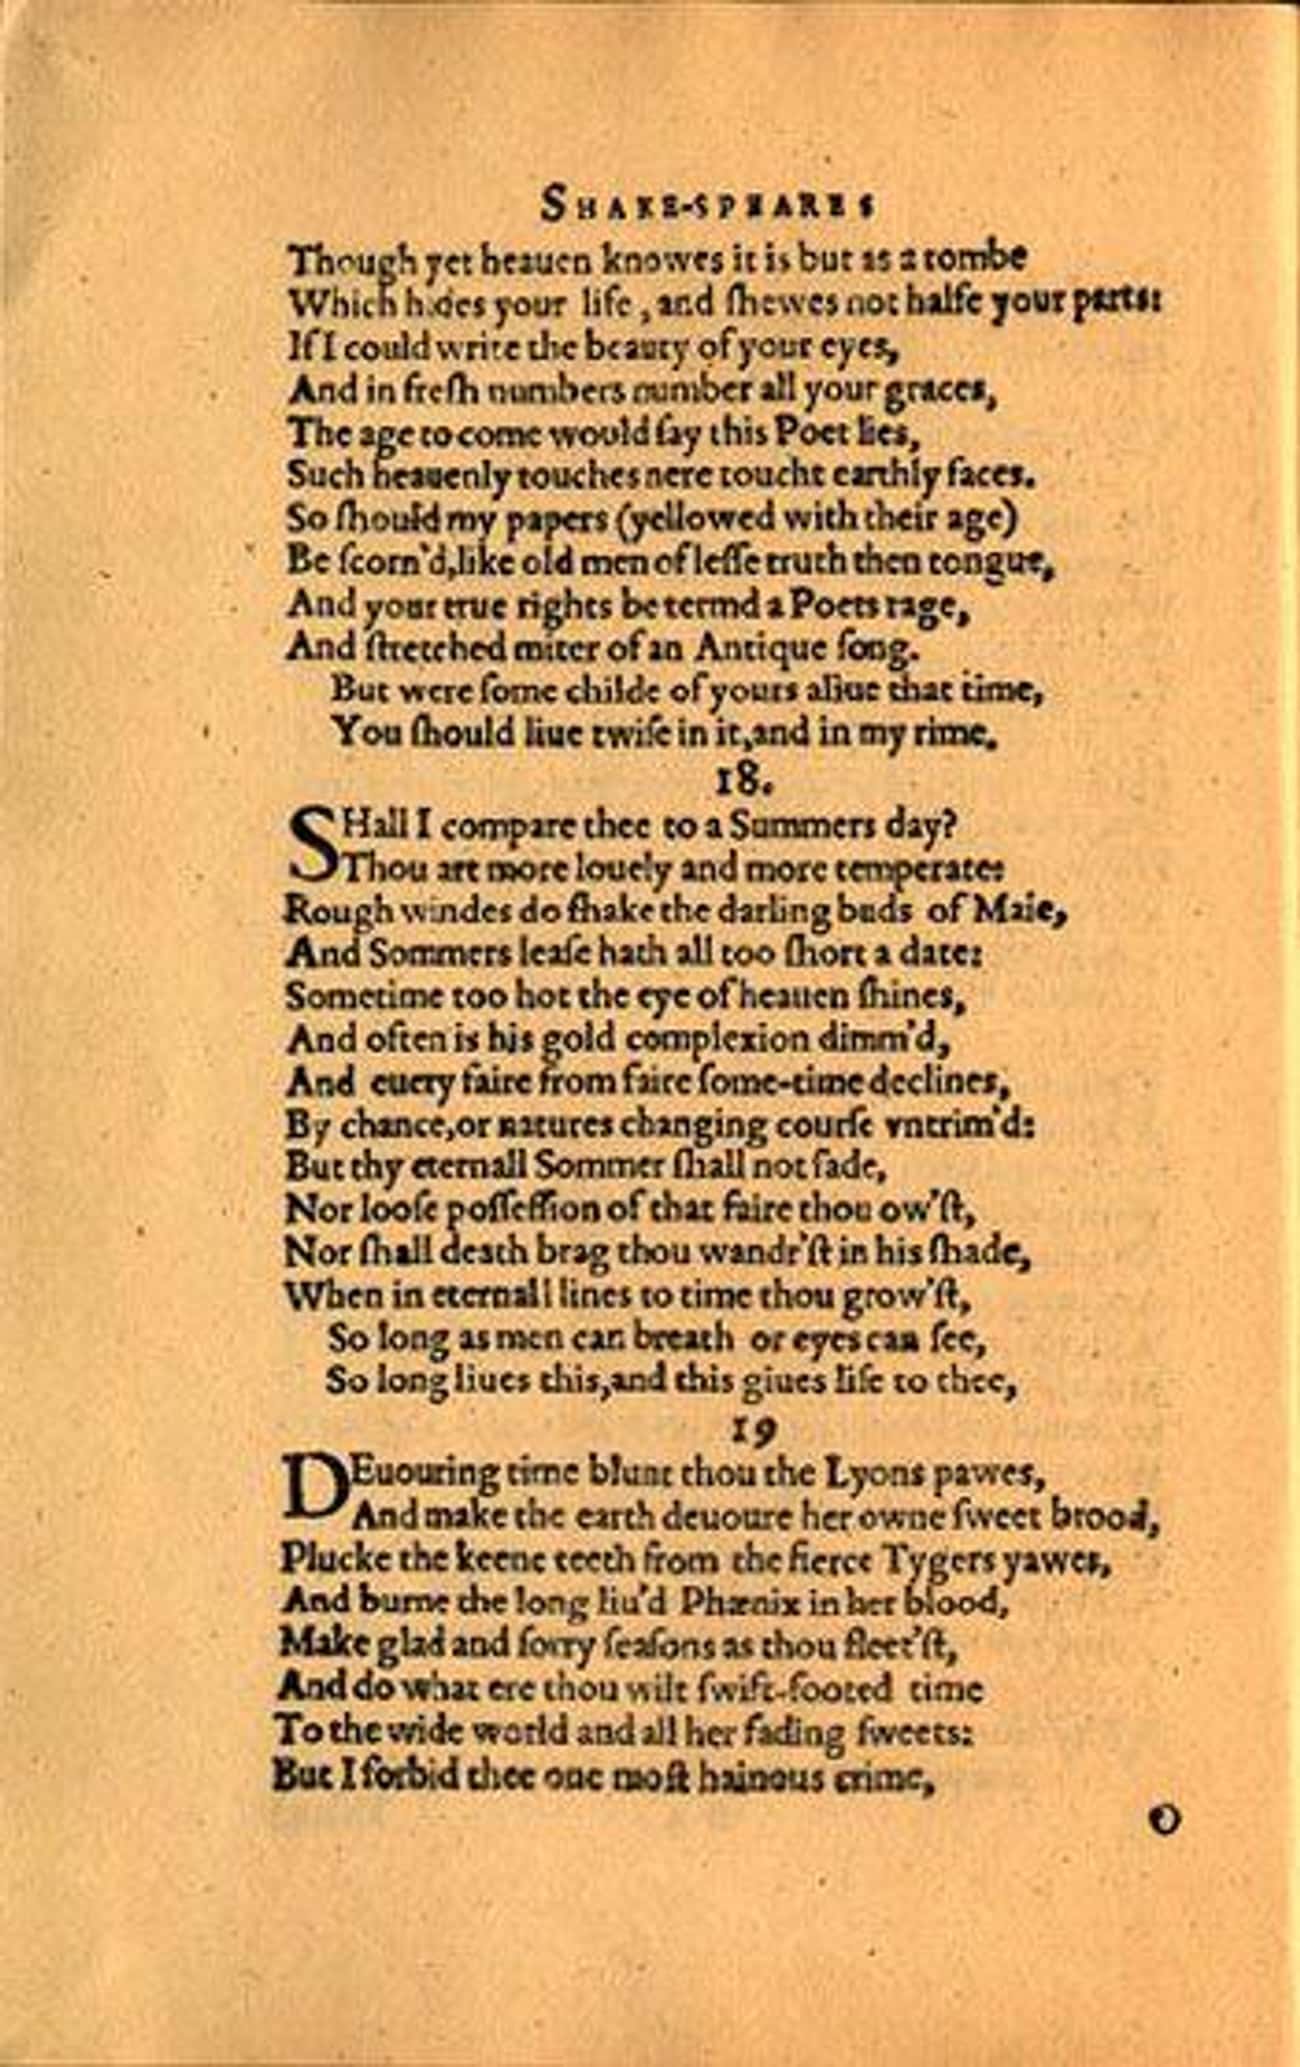 Sonnet 18 - Shall I compare thee to a summer&#39;s day?